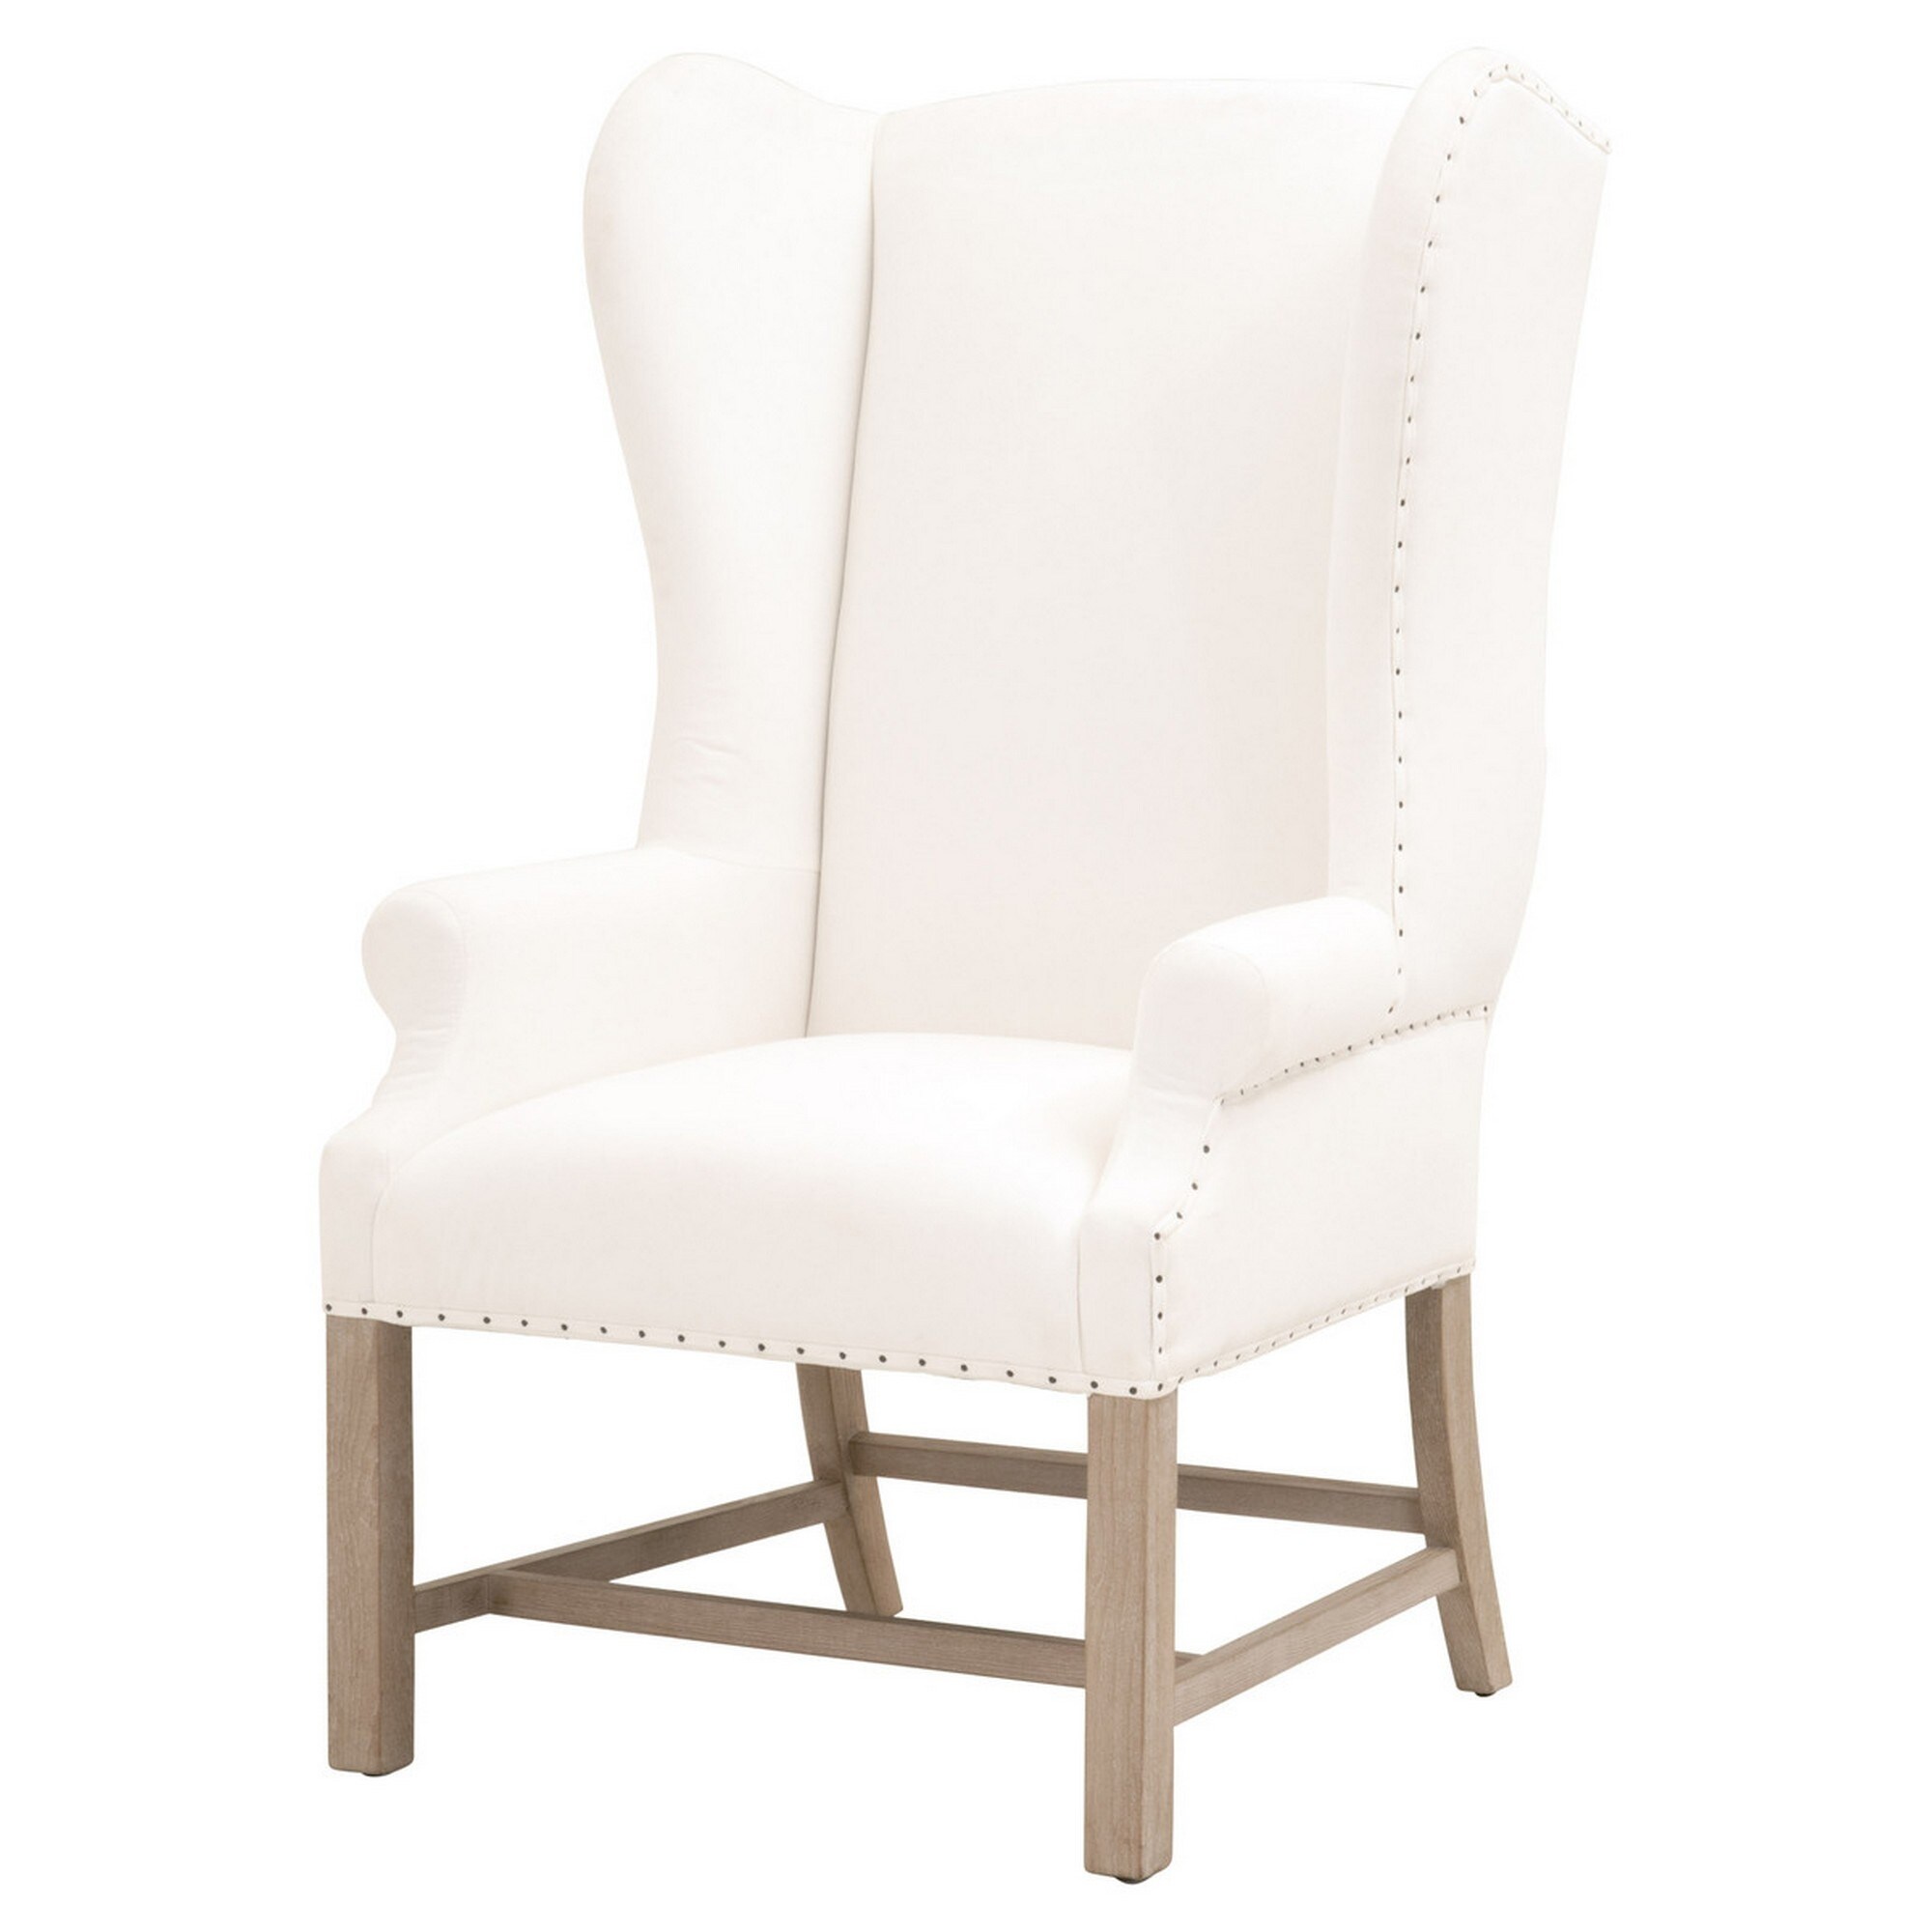 19 5 Inches Wingback Style Fabric Padded Arm Chair White Overstock 32591352